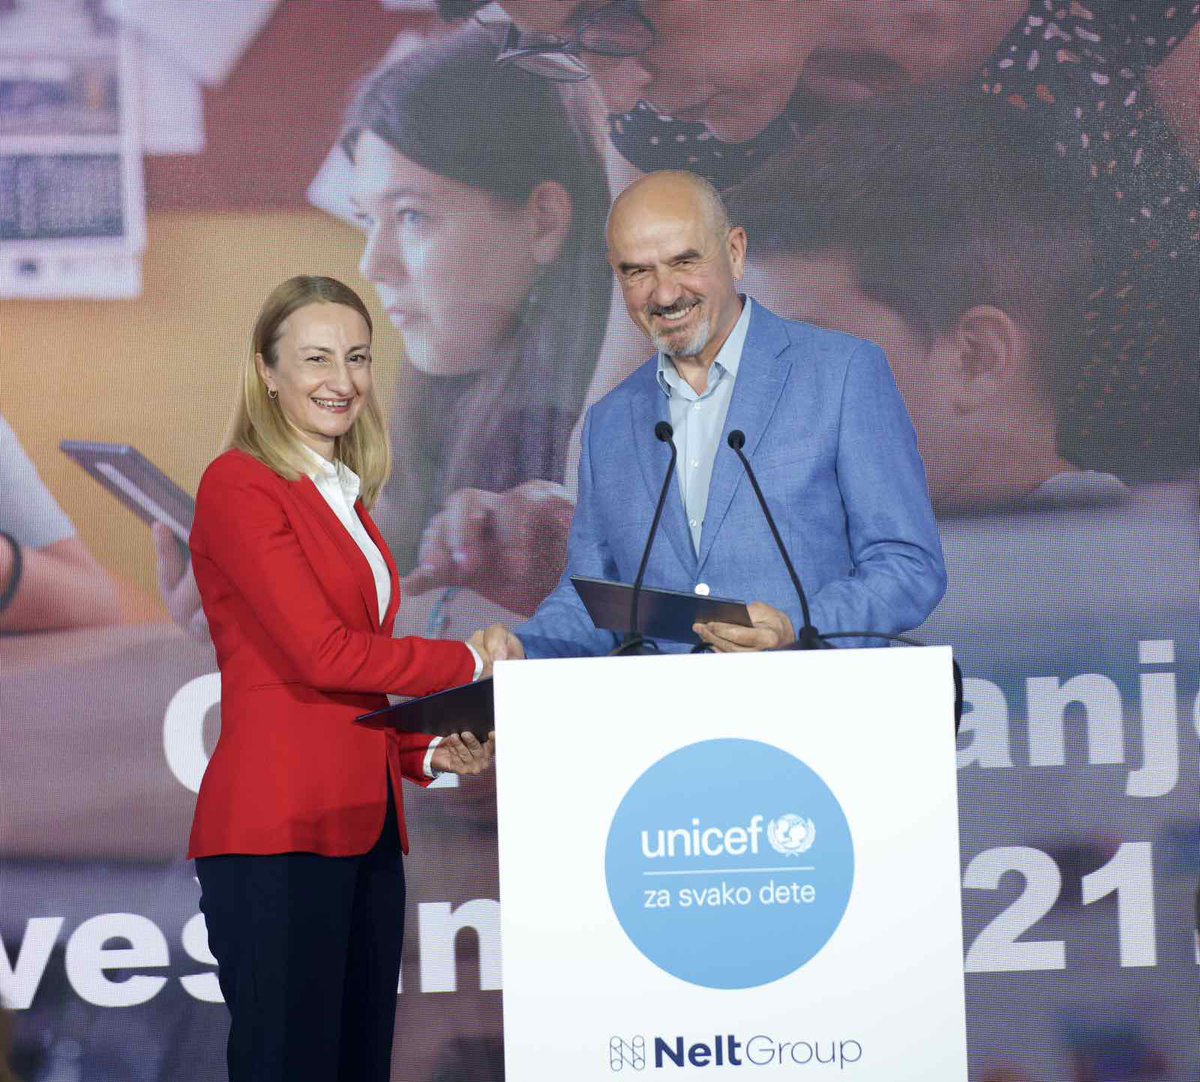 Excited to announce our strategic partnership with NELT Group, worth $1.3 million, to equip children w/ essential 21st-century skills in Serbia, North Macedonia, Bosnia and Herzegovina & Angola! Together, we're shaping the future for generations to come >> rb.gy/c8peee